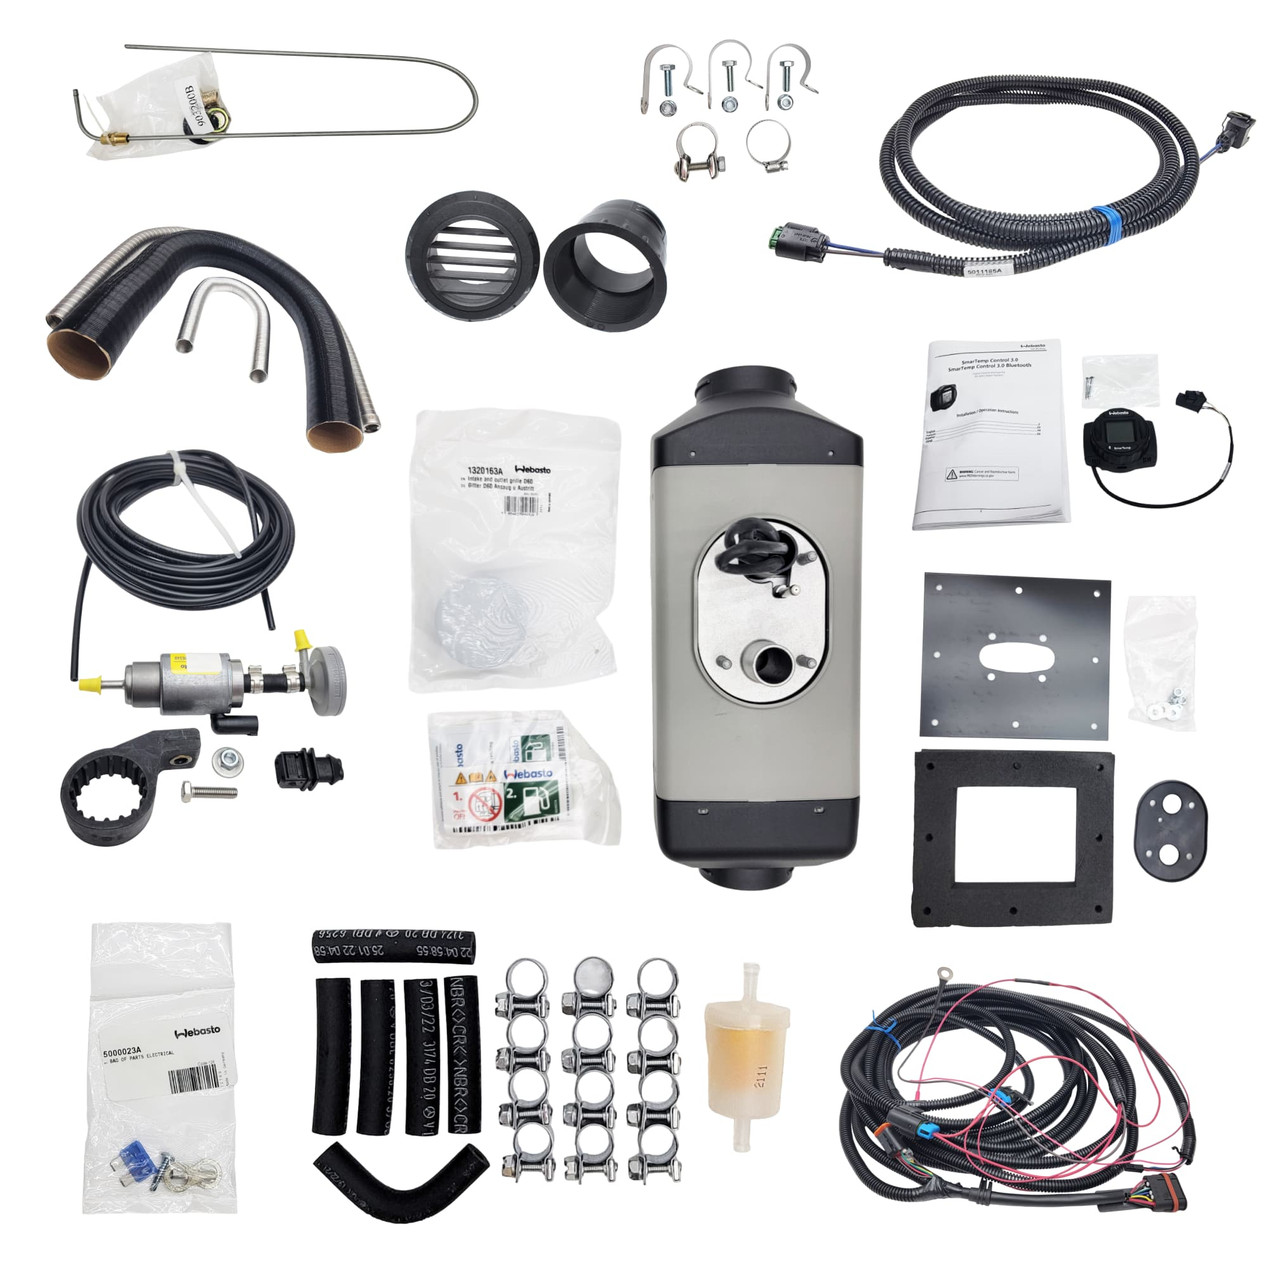 Webasto Air Top 2000 STC 12V Gasoline Heater Kit with SmarTemp 3.0  controller